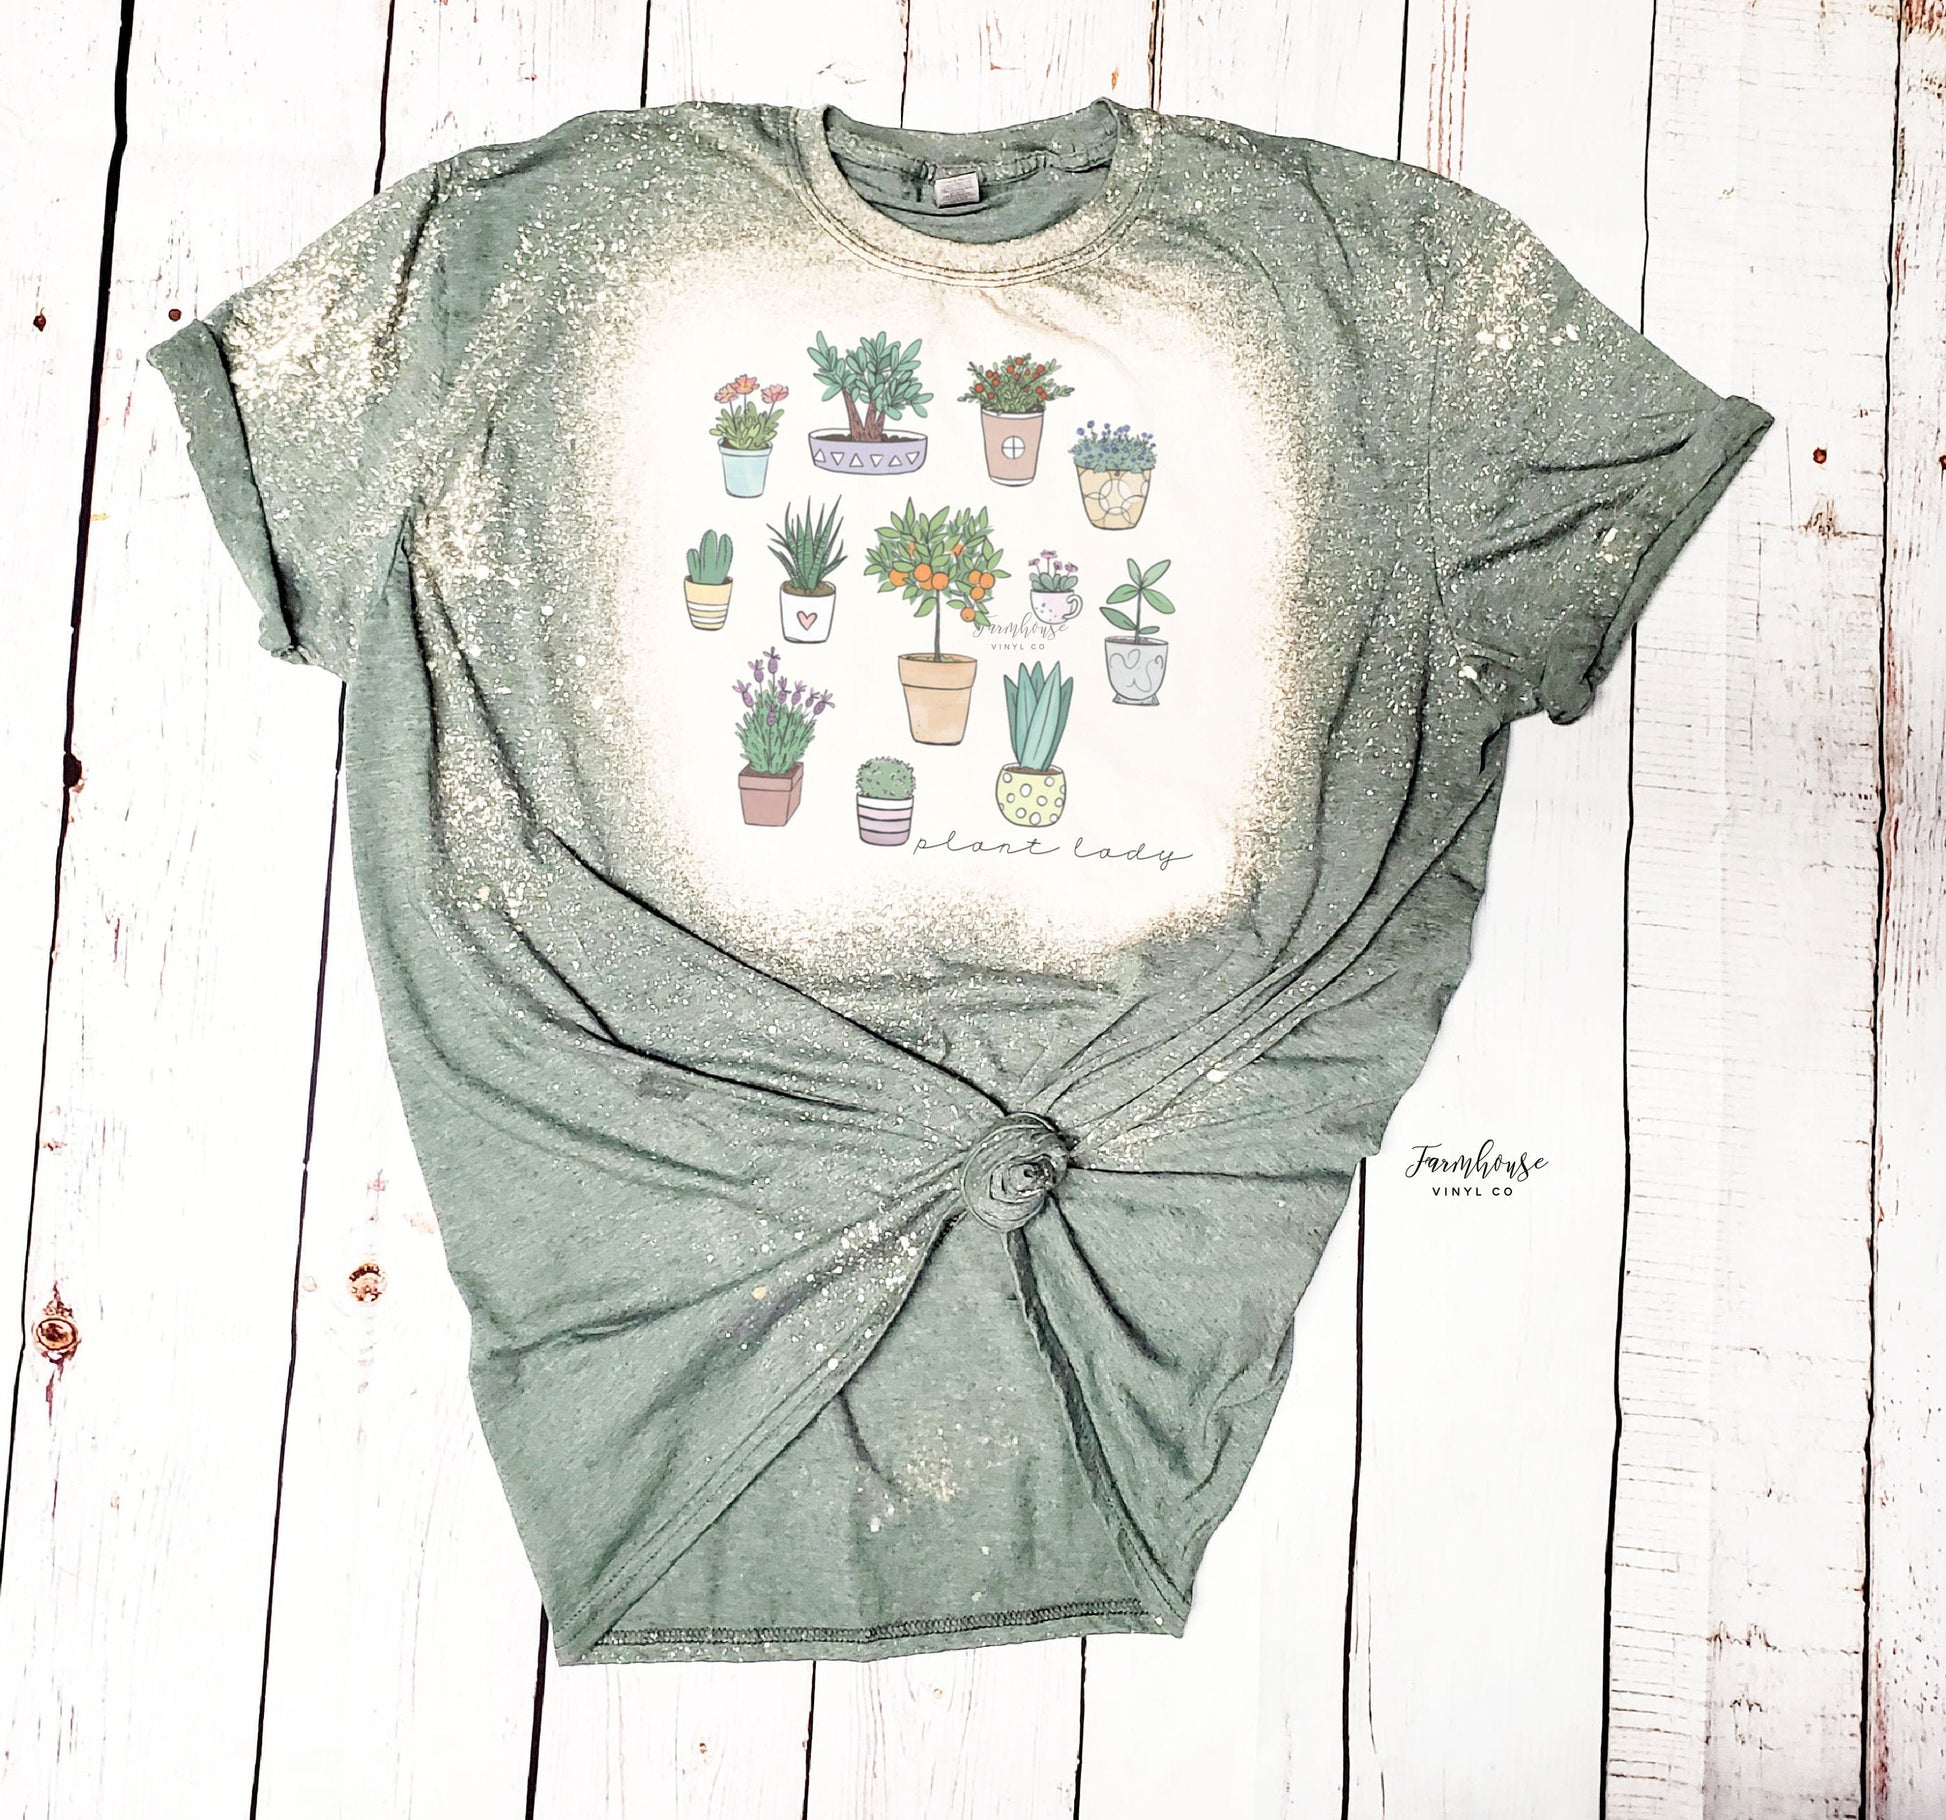 Plant Lady Bleached Tee Shirt / Plant Lover Gift Shirt / BOHO Hippie Tee Shirt / Colorful Plant Lady Shirt / Gift for Mom Nature Women - Farmhouse Vinyl Co